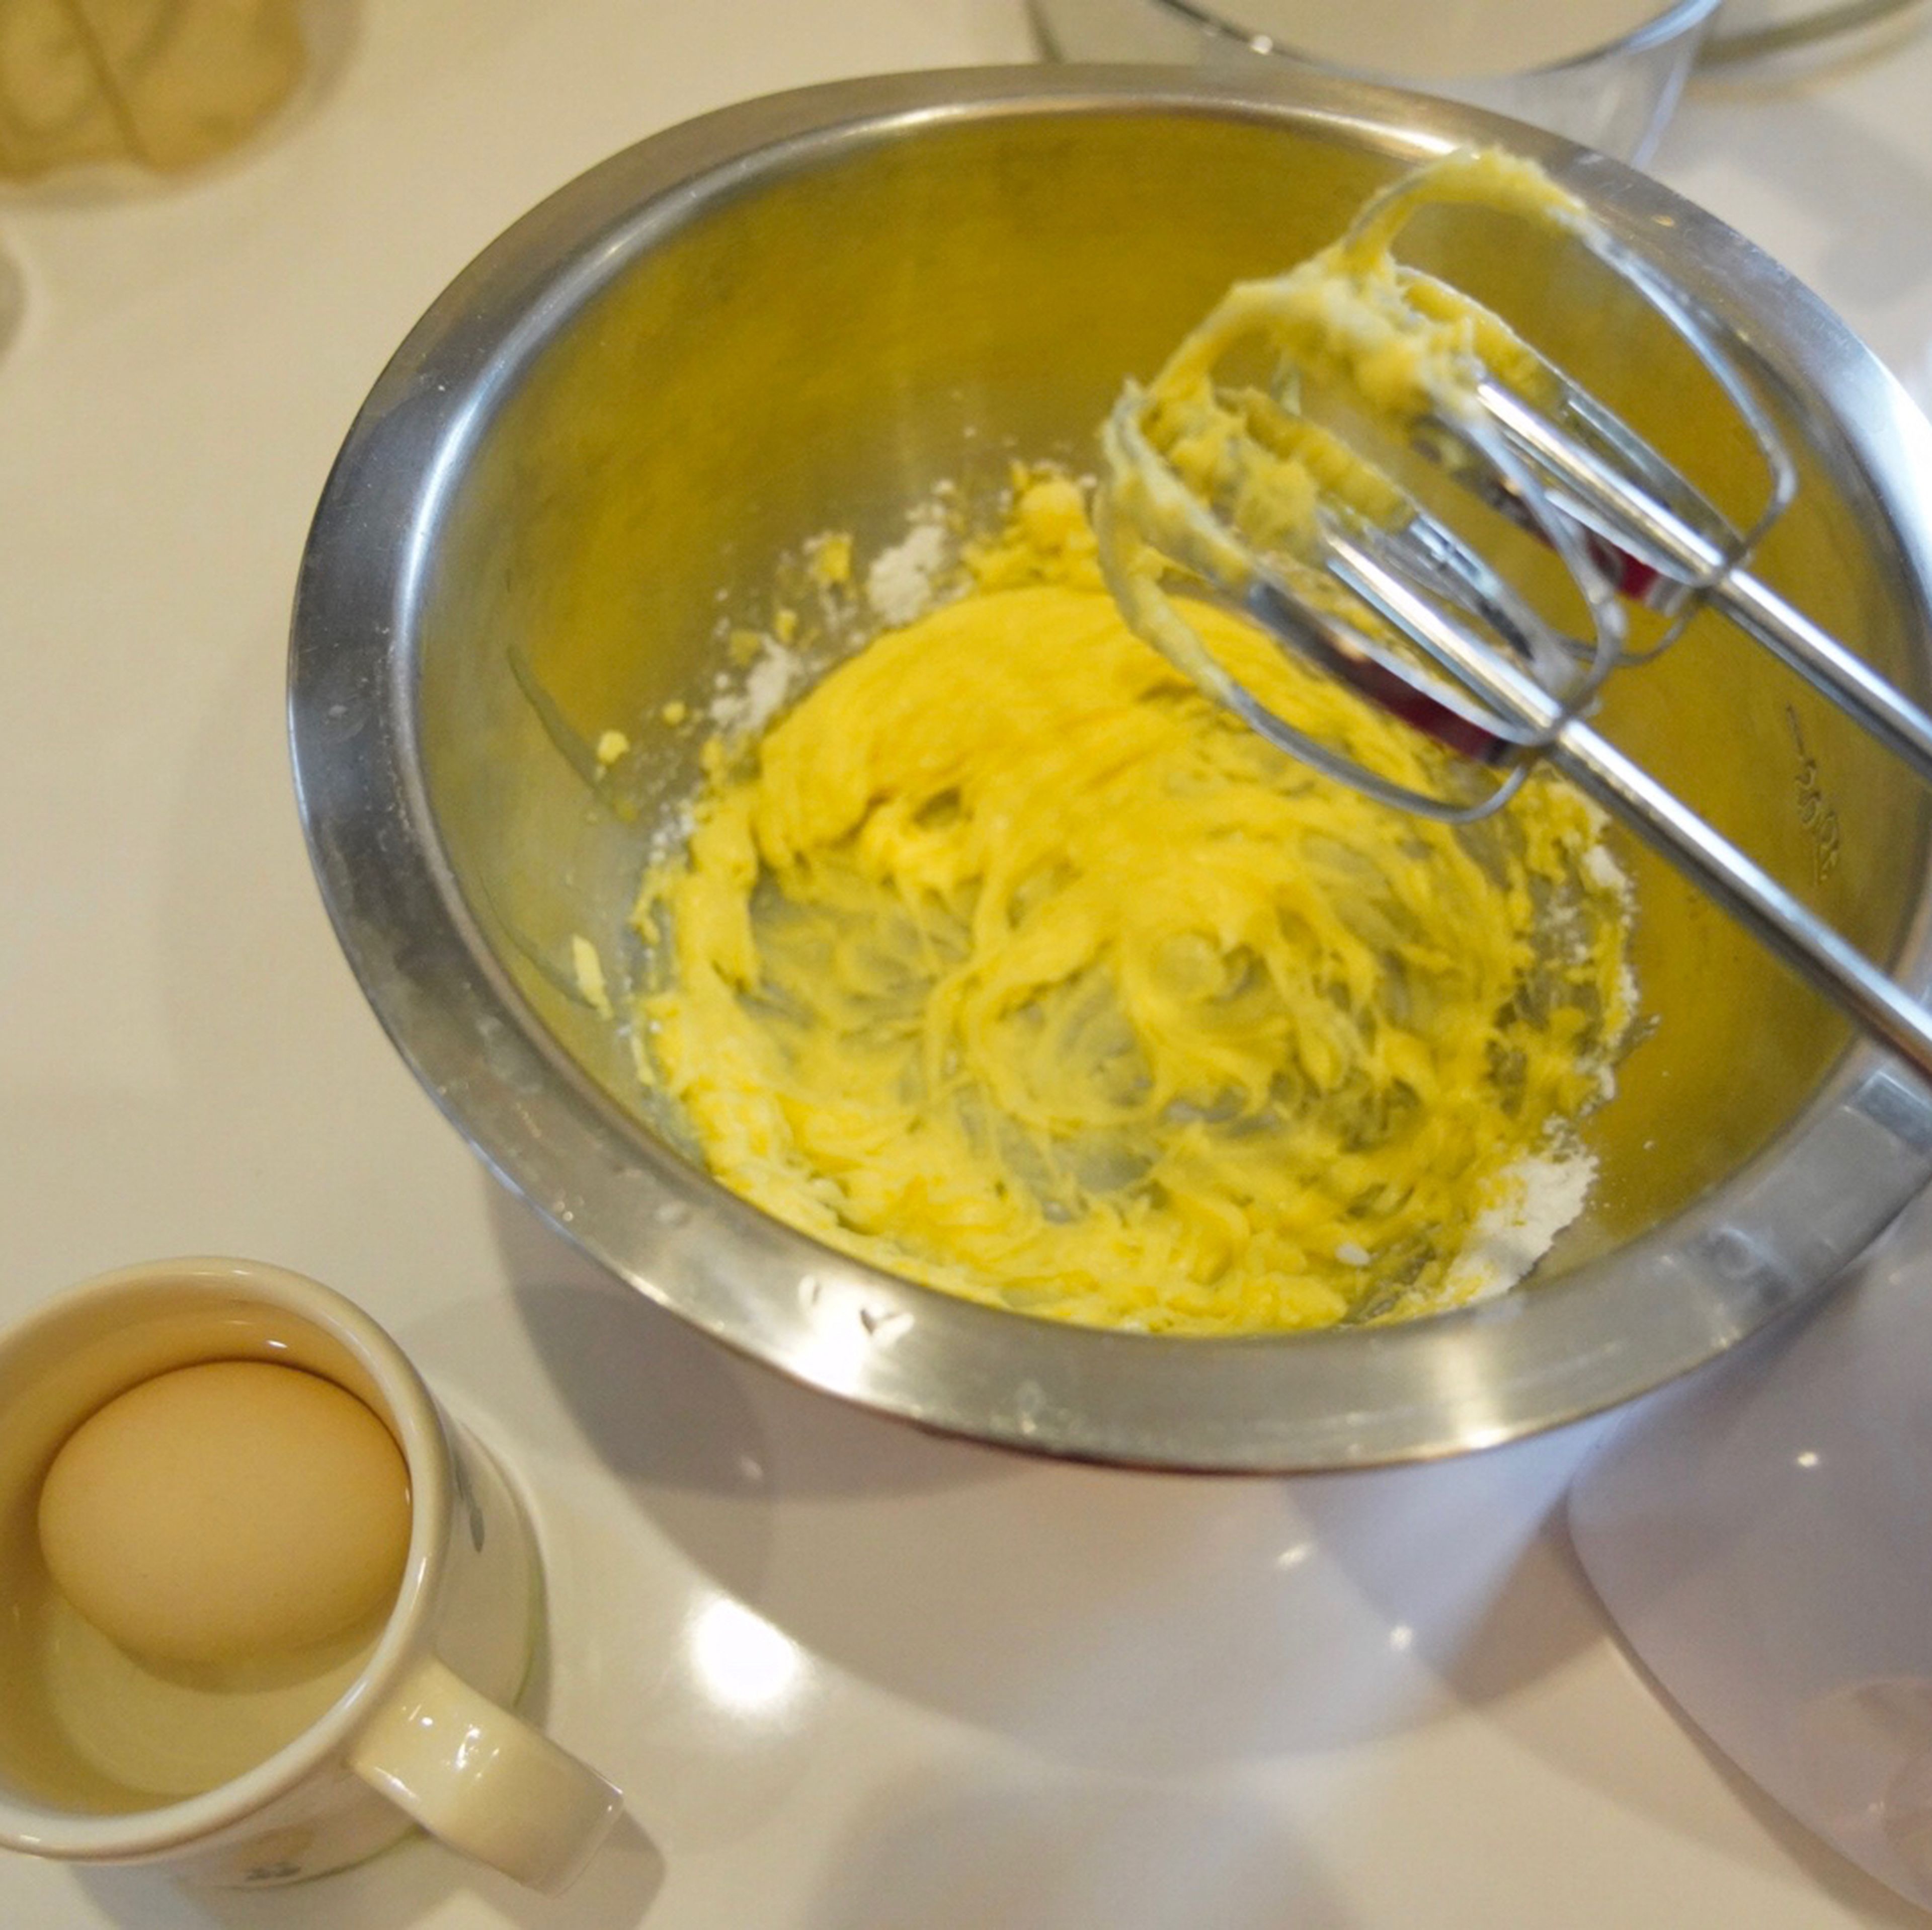 Whisk the egg, butter, powdered sugar until smooth. Add flour and milk powder using a sieve.